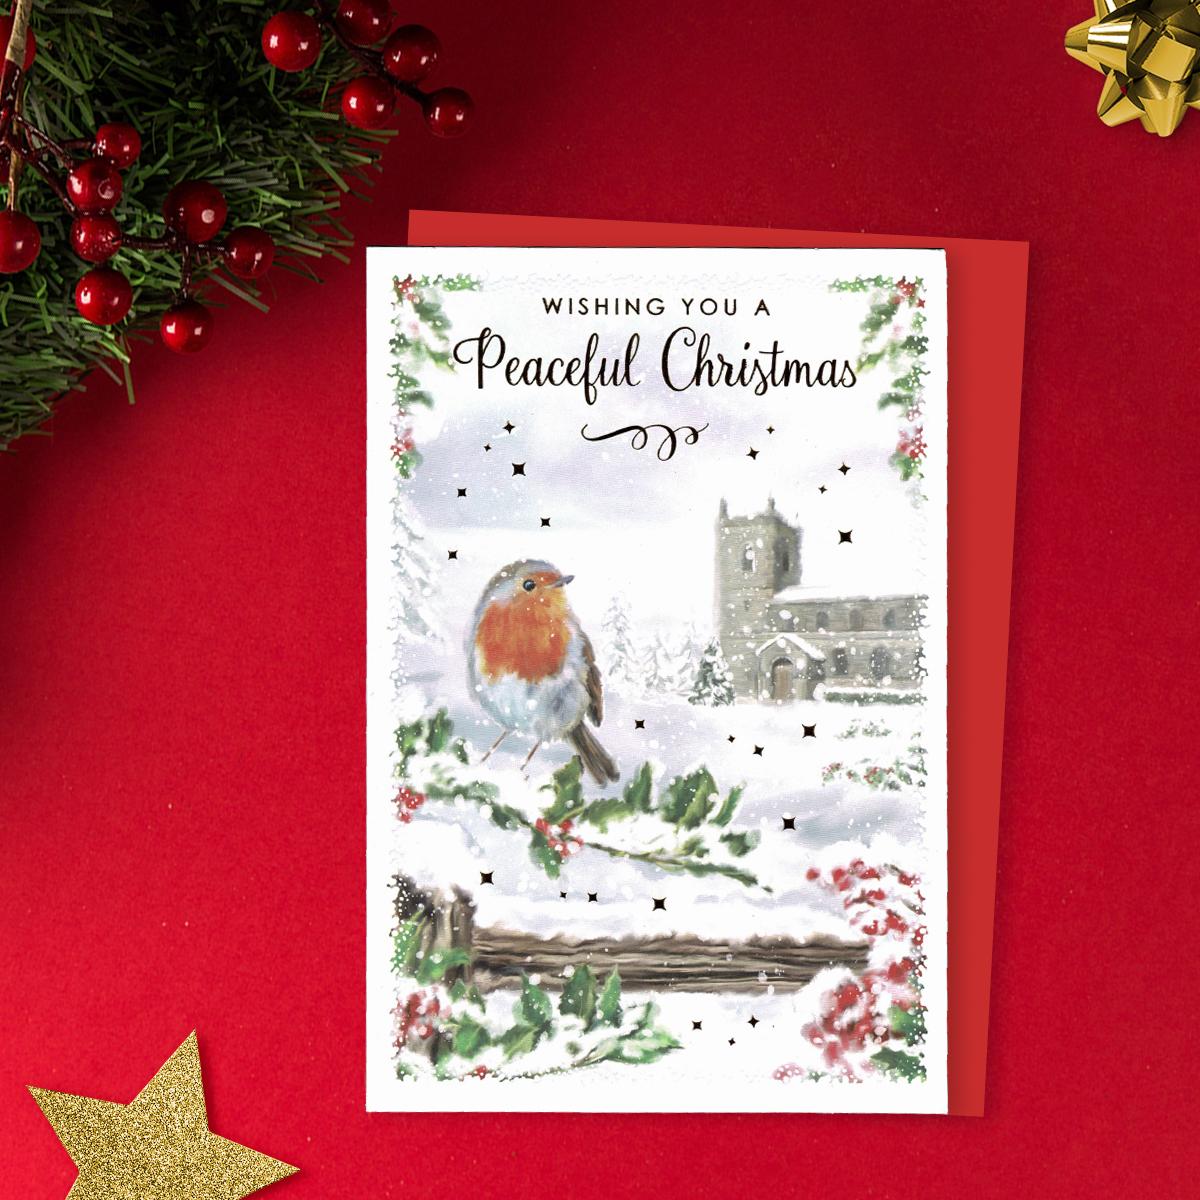 Wishing You A Peaceful Christmas Featuring A Robin In The Snow With Church in The Background. finished with Gold Foil Details And Red Envelope